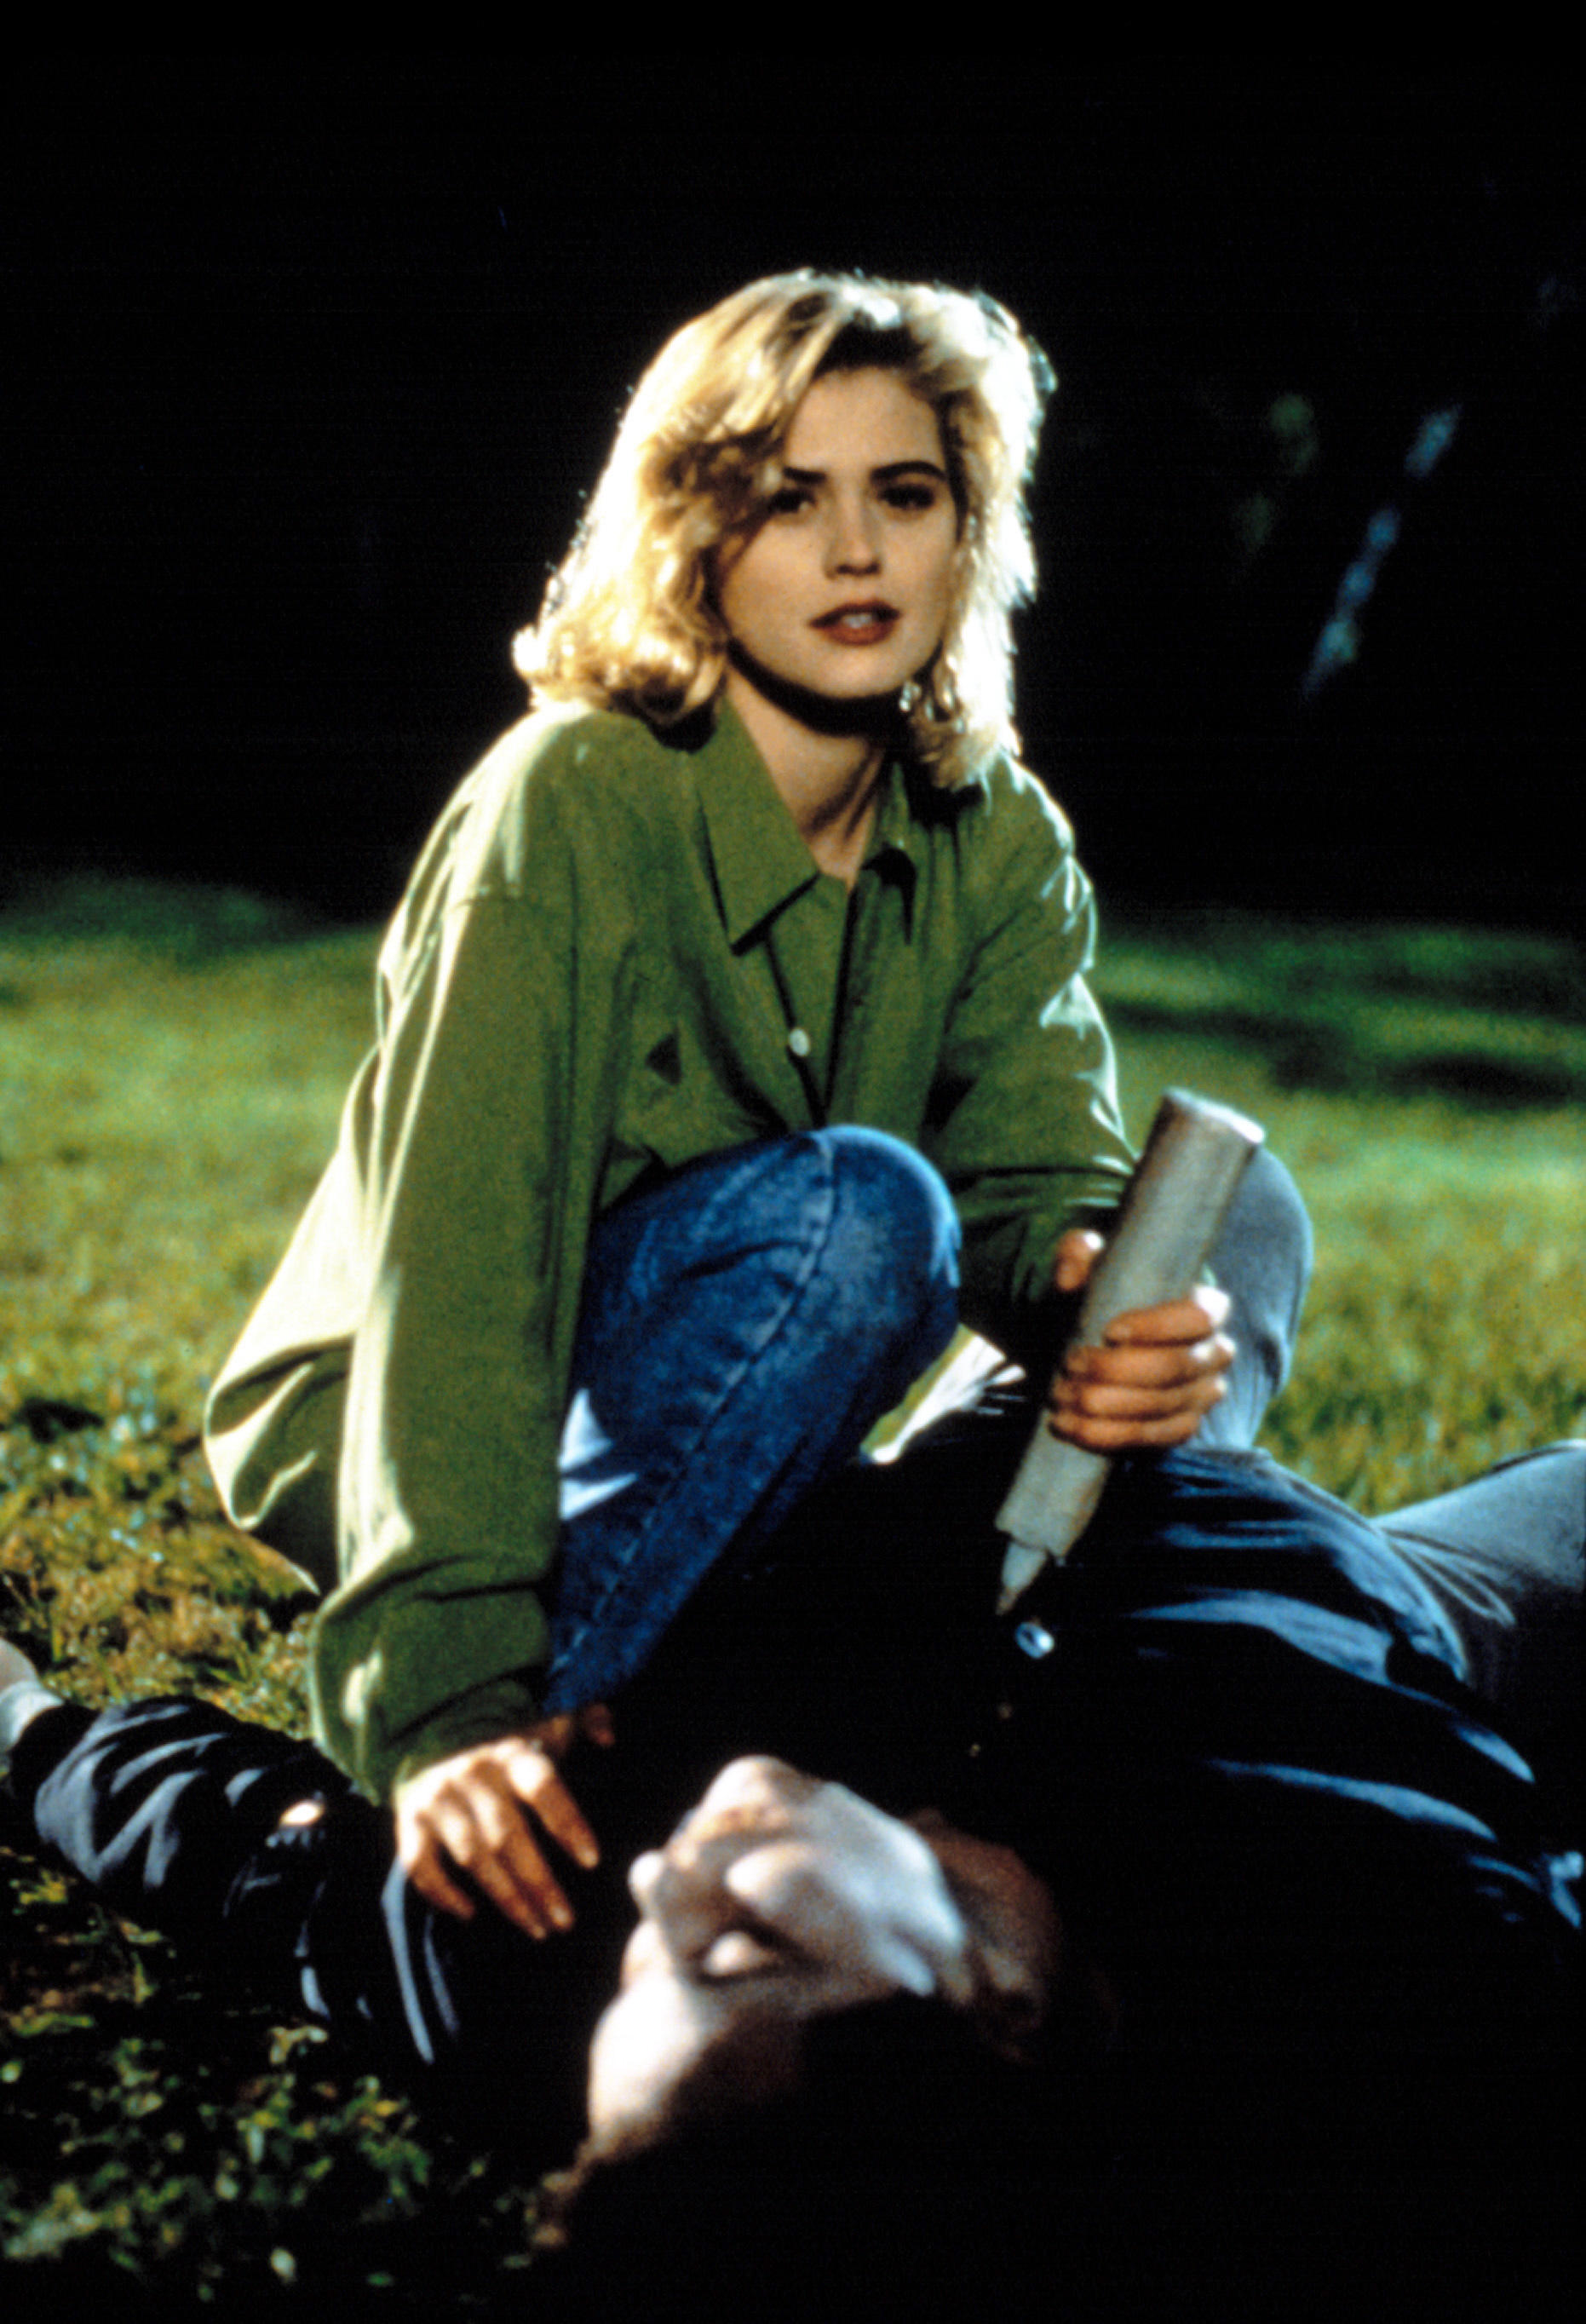 She played Buffy The Vampire Slayer in Joss Whedon's 1992 movie